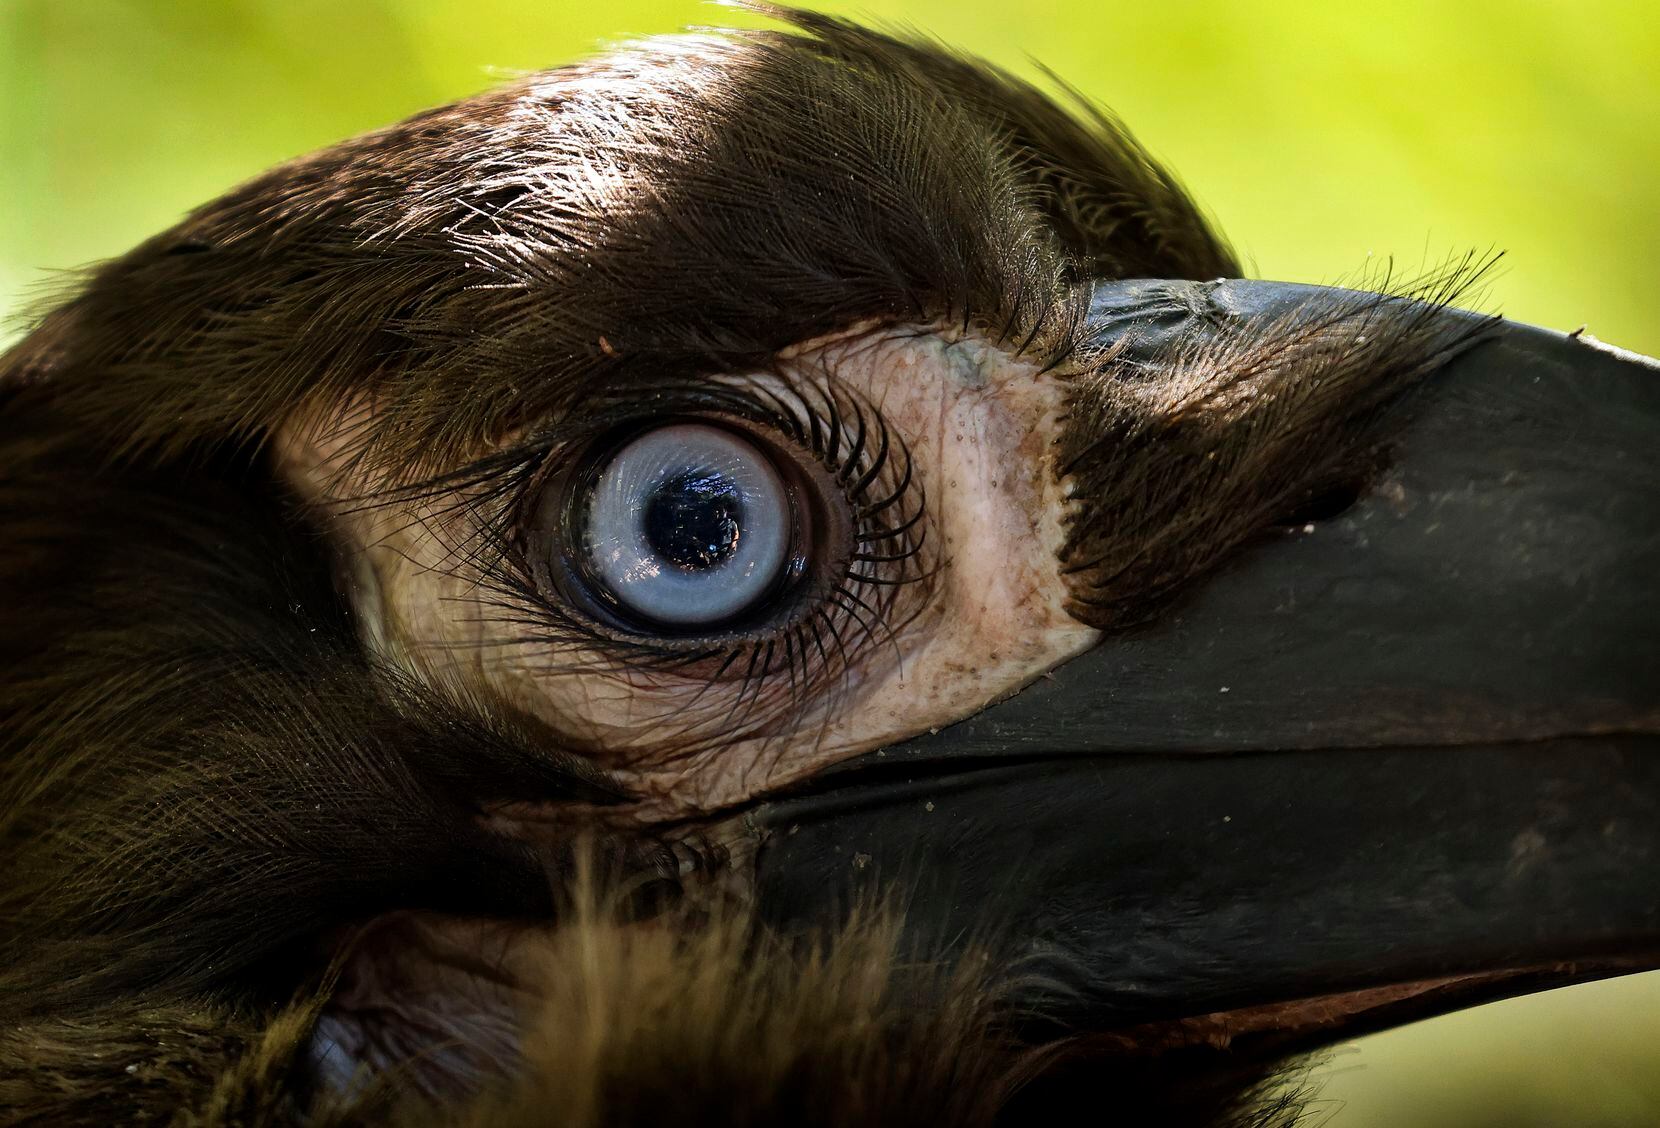 Distinctive feather lashes circle the eye of Kune, a southern ground hornbill that was hatched at the Dallas Zoo in the summer and cared for by Ann Knutson, assistant zoological manager of birds. The zoo has a family of hornbills and has raised hornbill chicks since 2017.